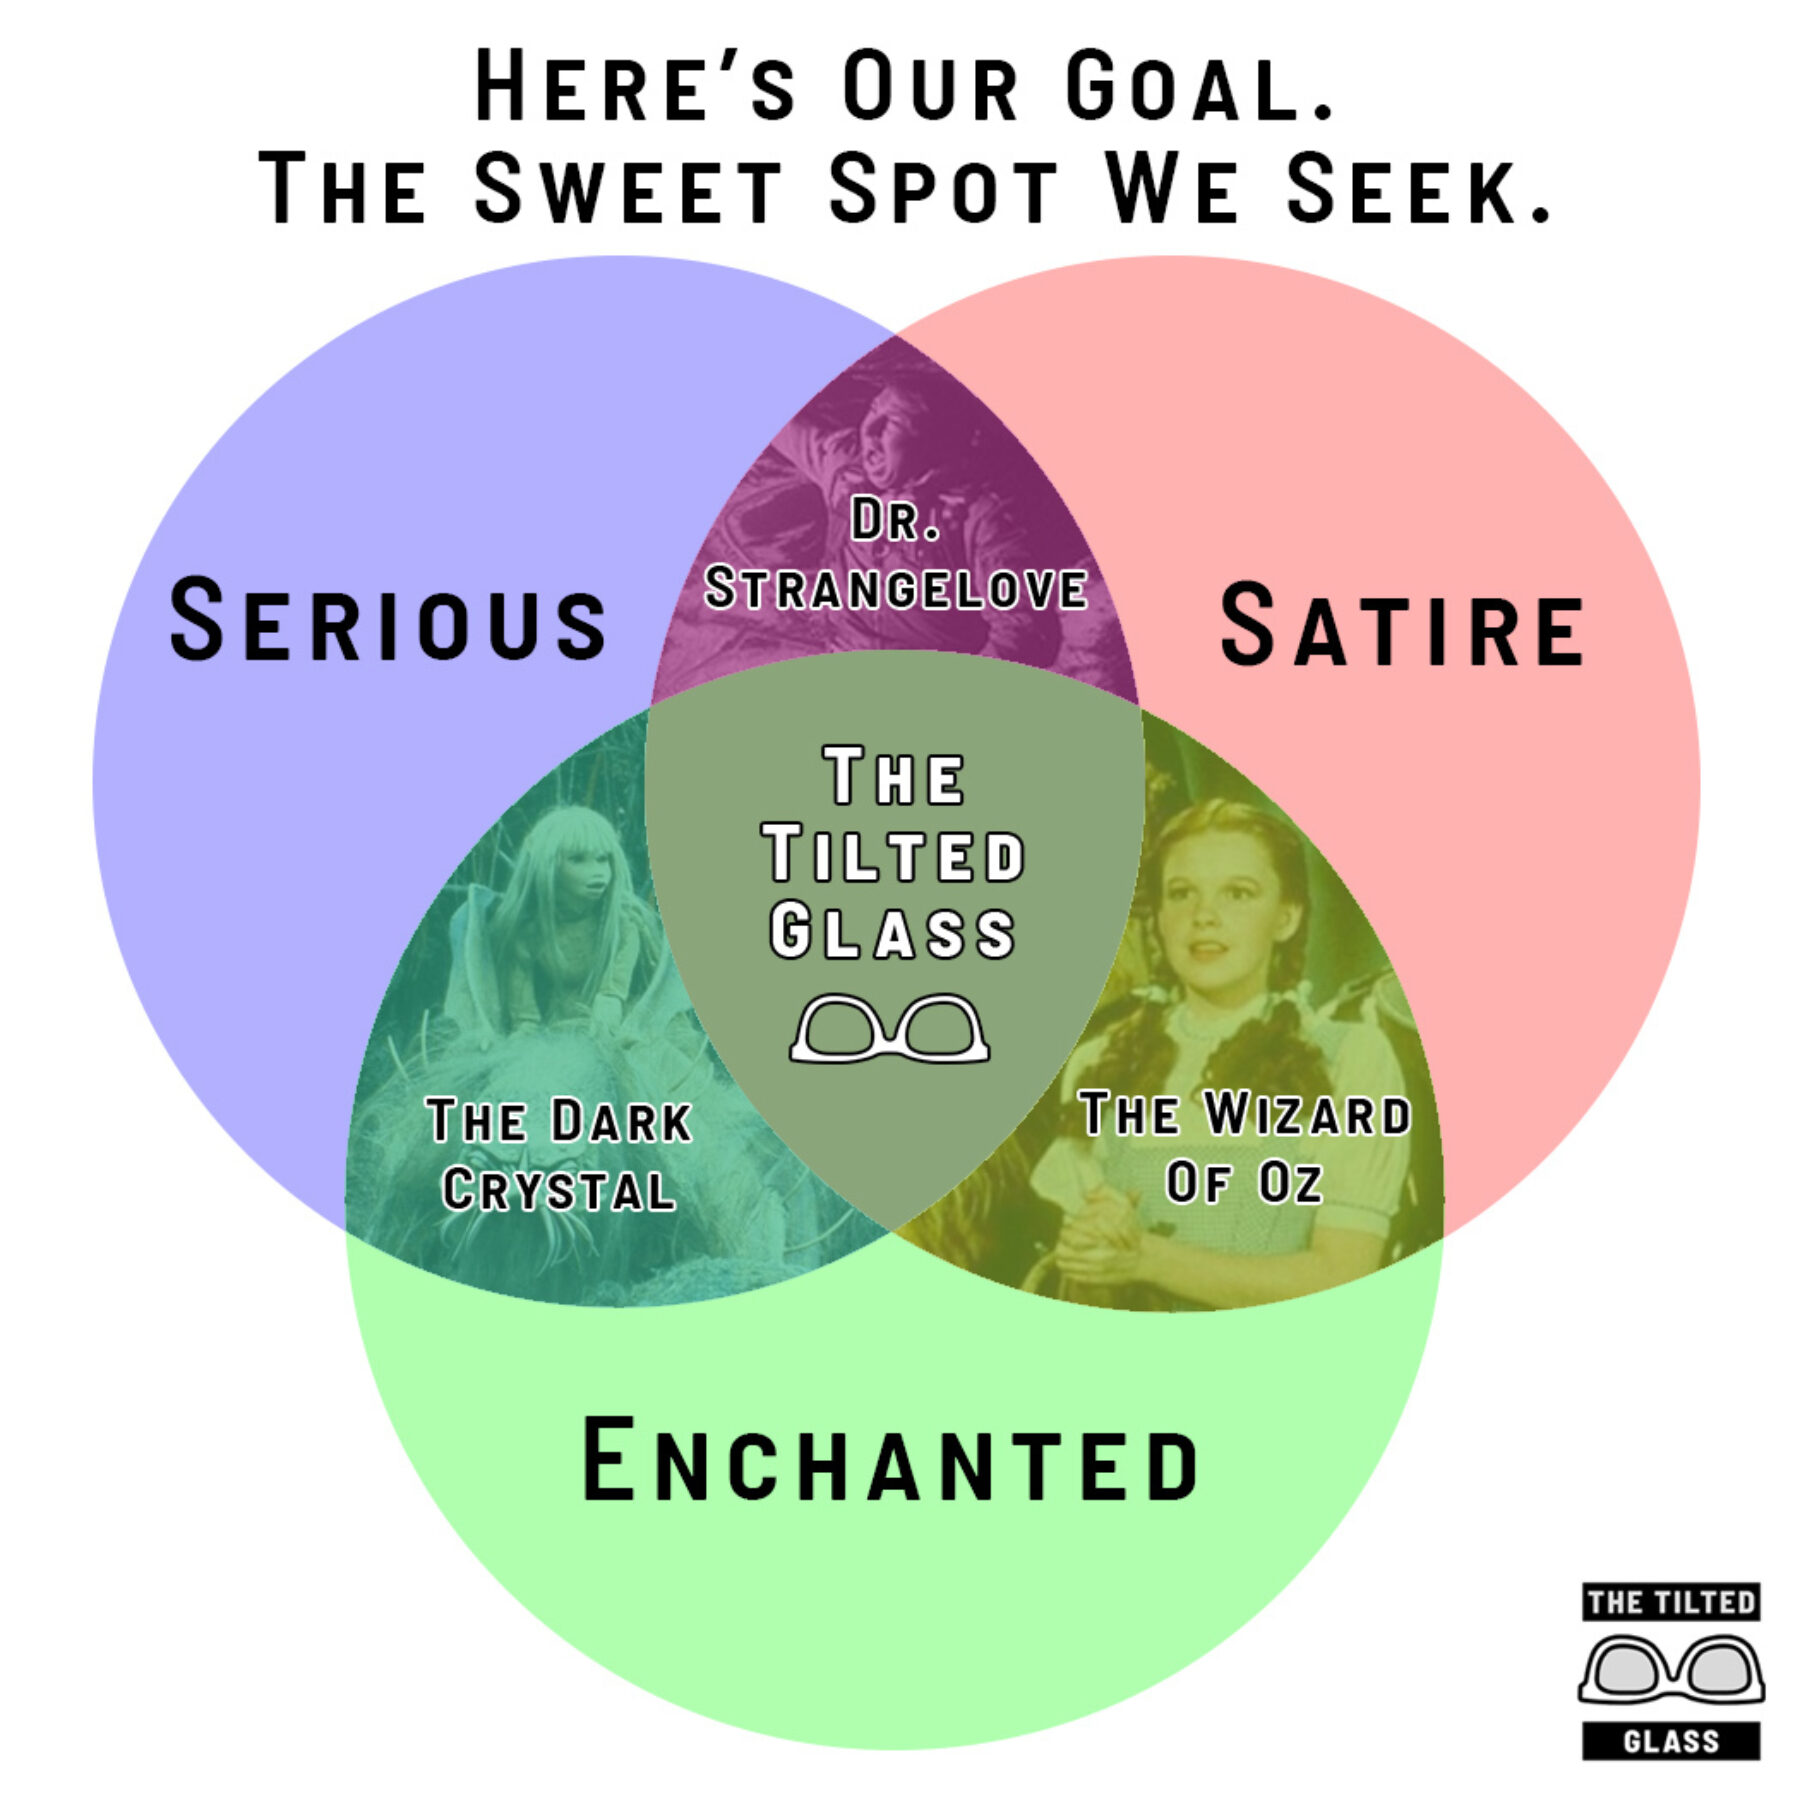 Serious + Satire + Enchanted: Our Sweet Spot, Our Perfect "Joke"